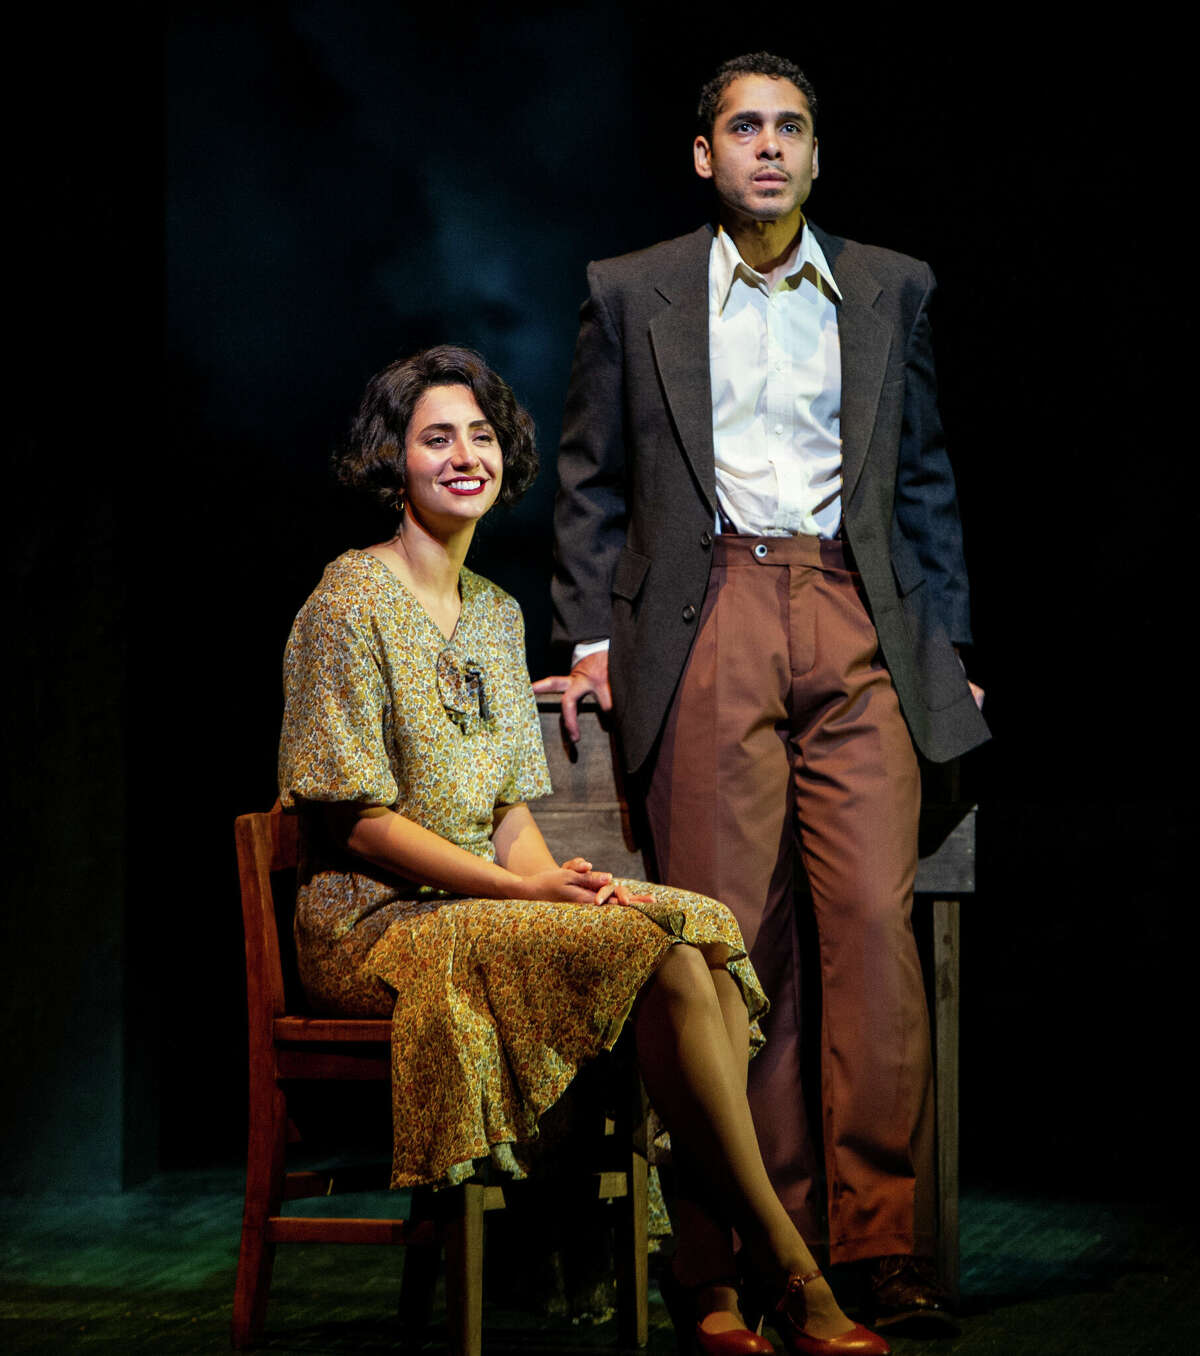 Marina Pires and Wilson Jermaine Heredia play a married couple whose relationship is foundering in "Anna in the Tropics," running through July 30, 2022, at Barrington Stage Company in Pittsfield, Mass.  Heredia won Tony, Drama Desk and Obie awards in 1996 for playing the role of Angel in "Rent."